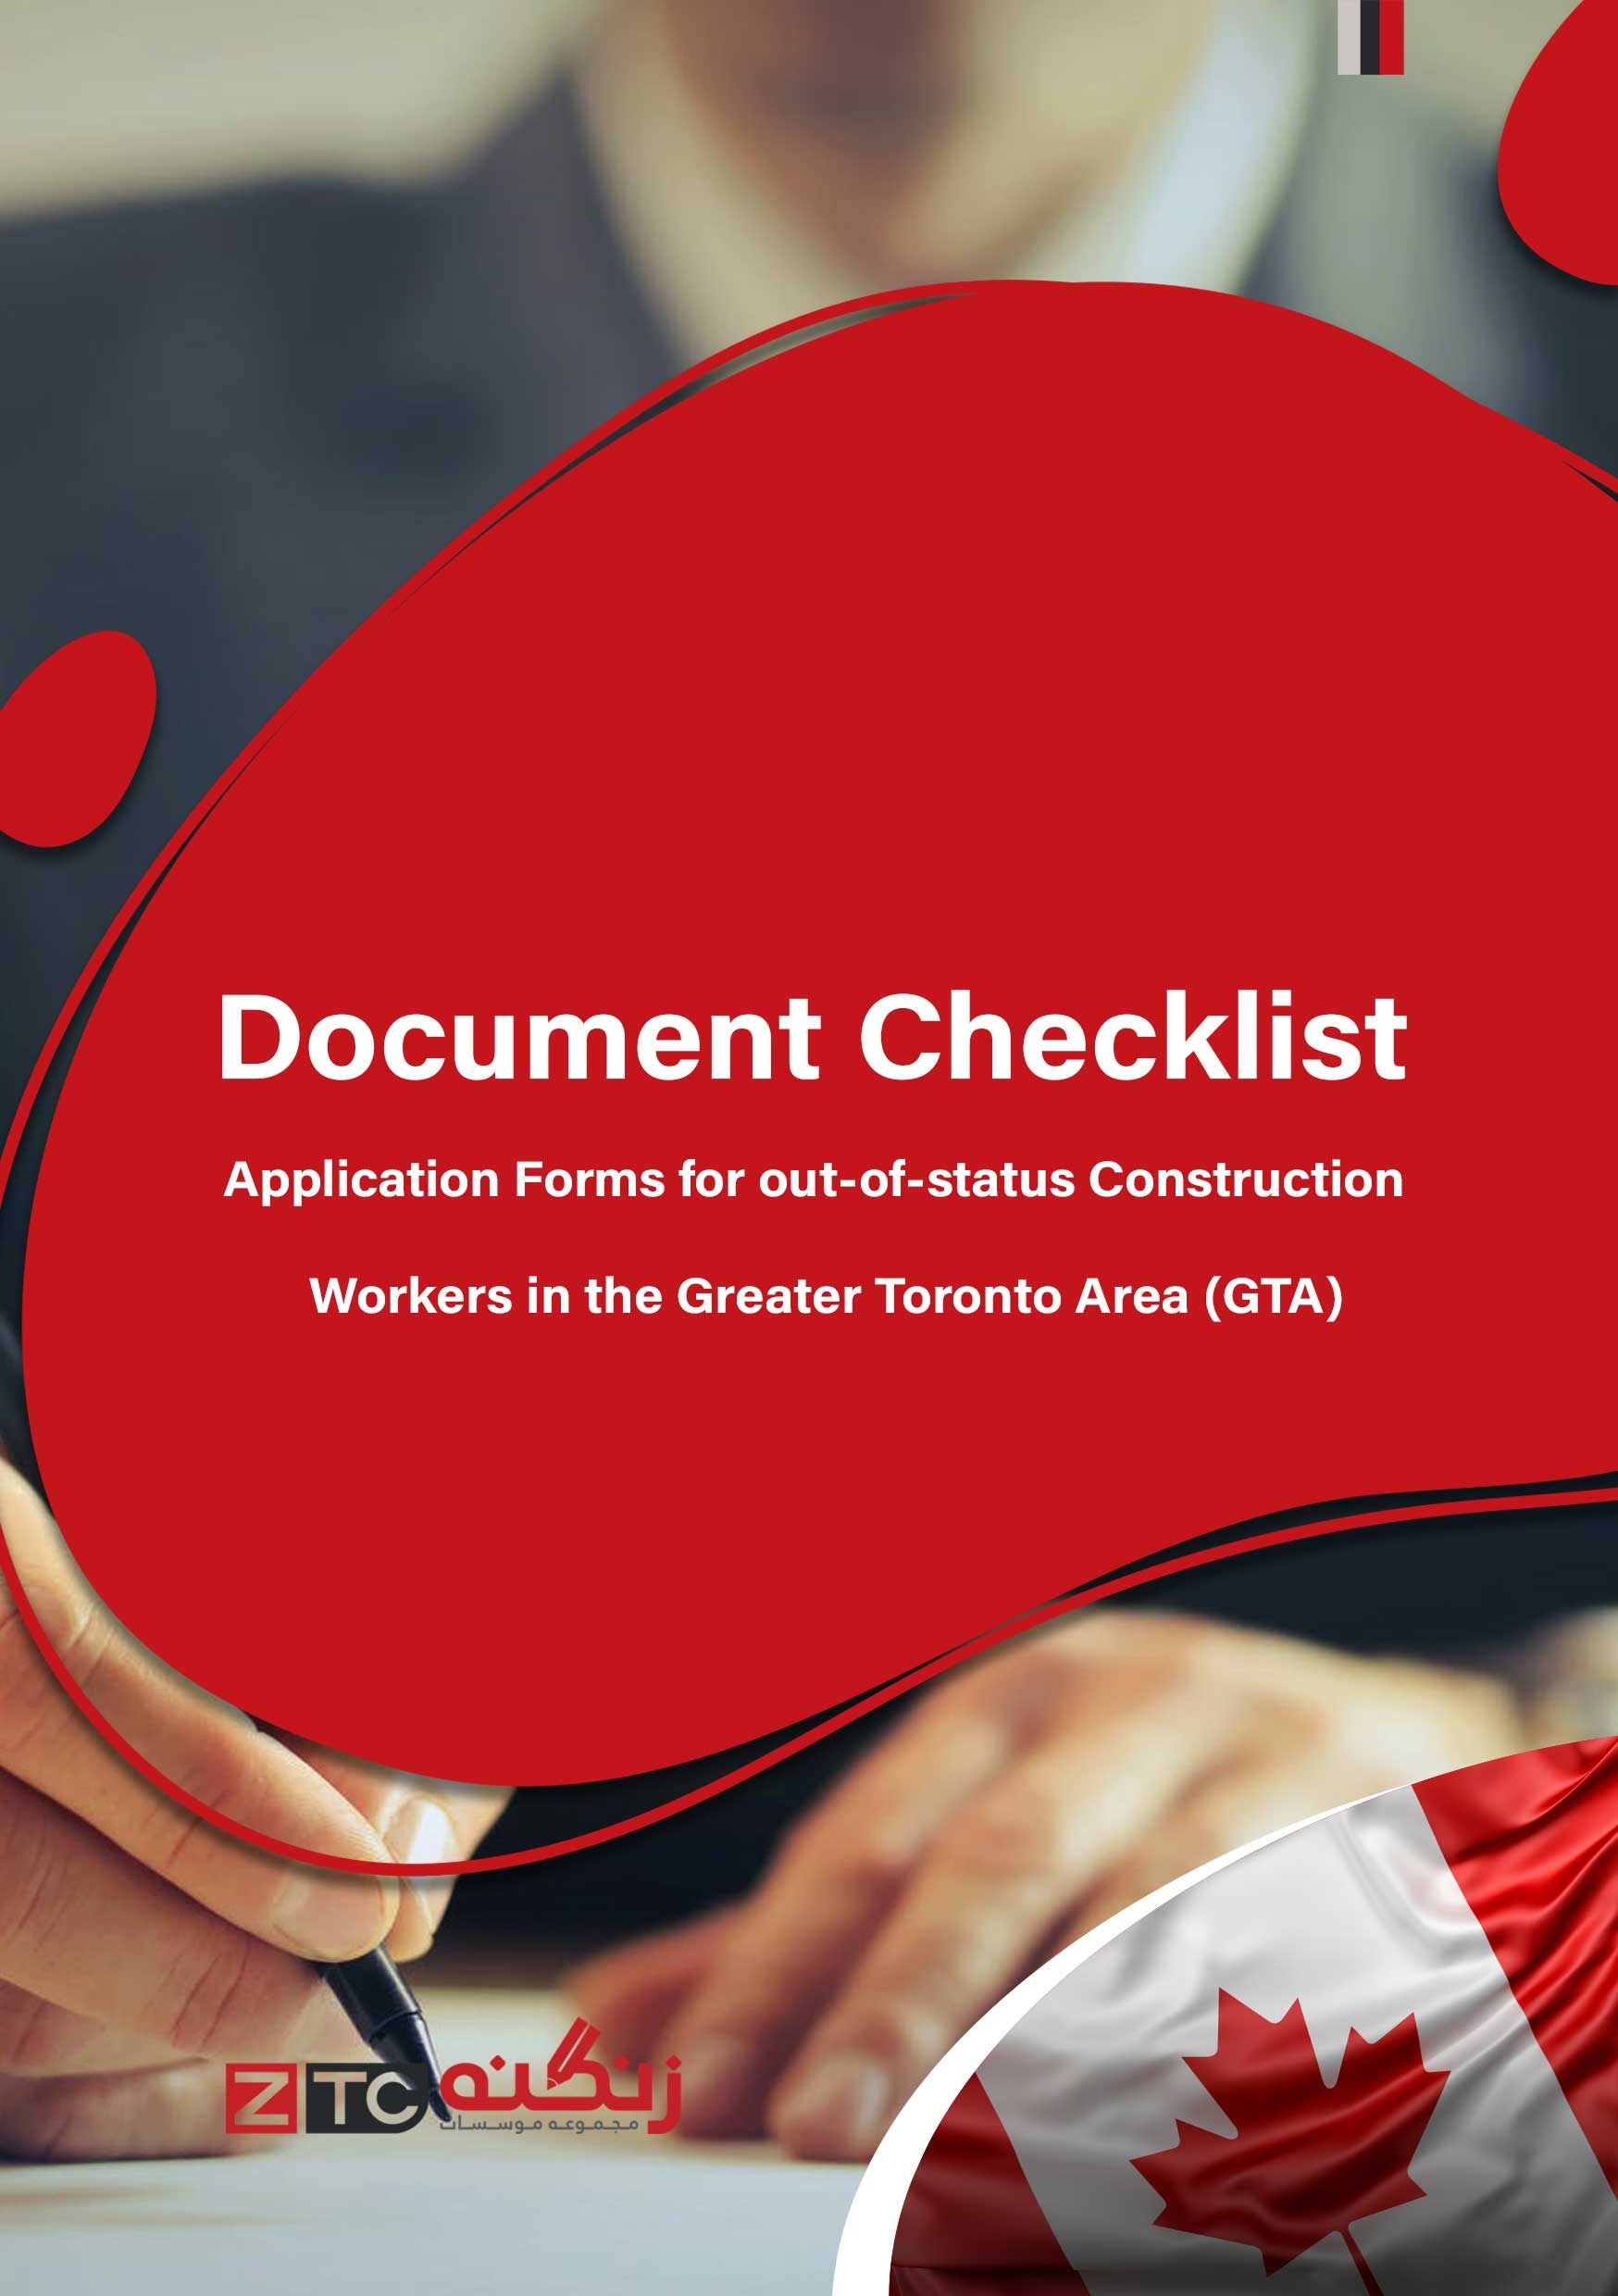 Document Checklist Application Forms for out-of-status Construction Workers in the Greater Toronto Area (GTA)